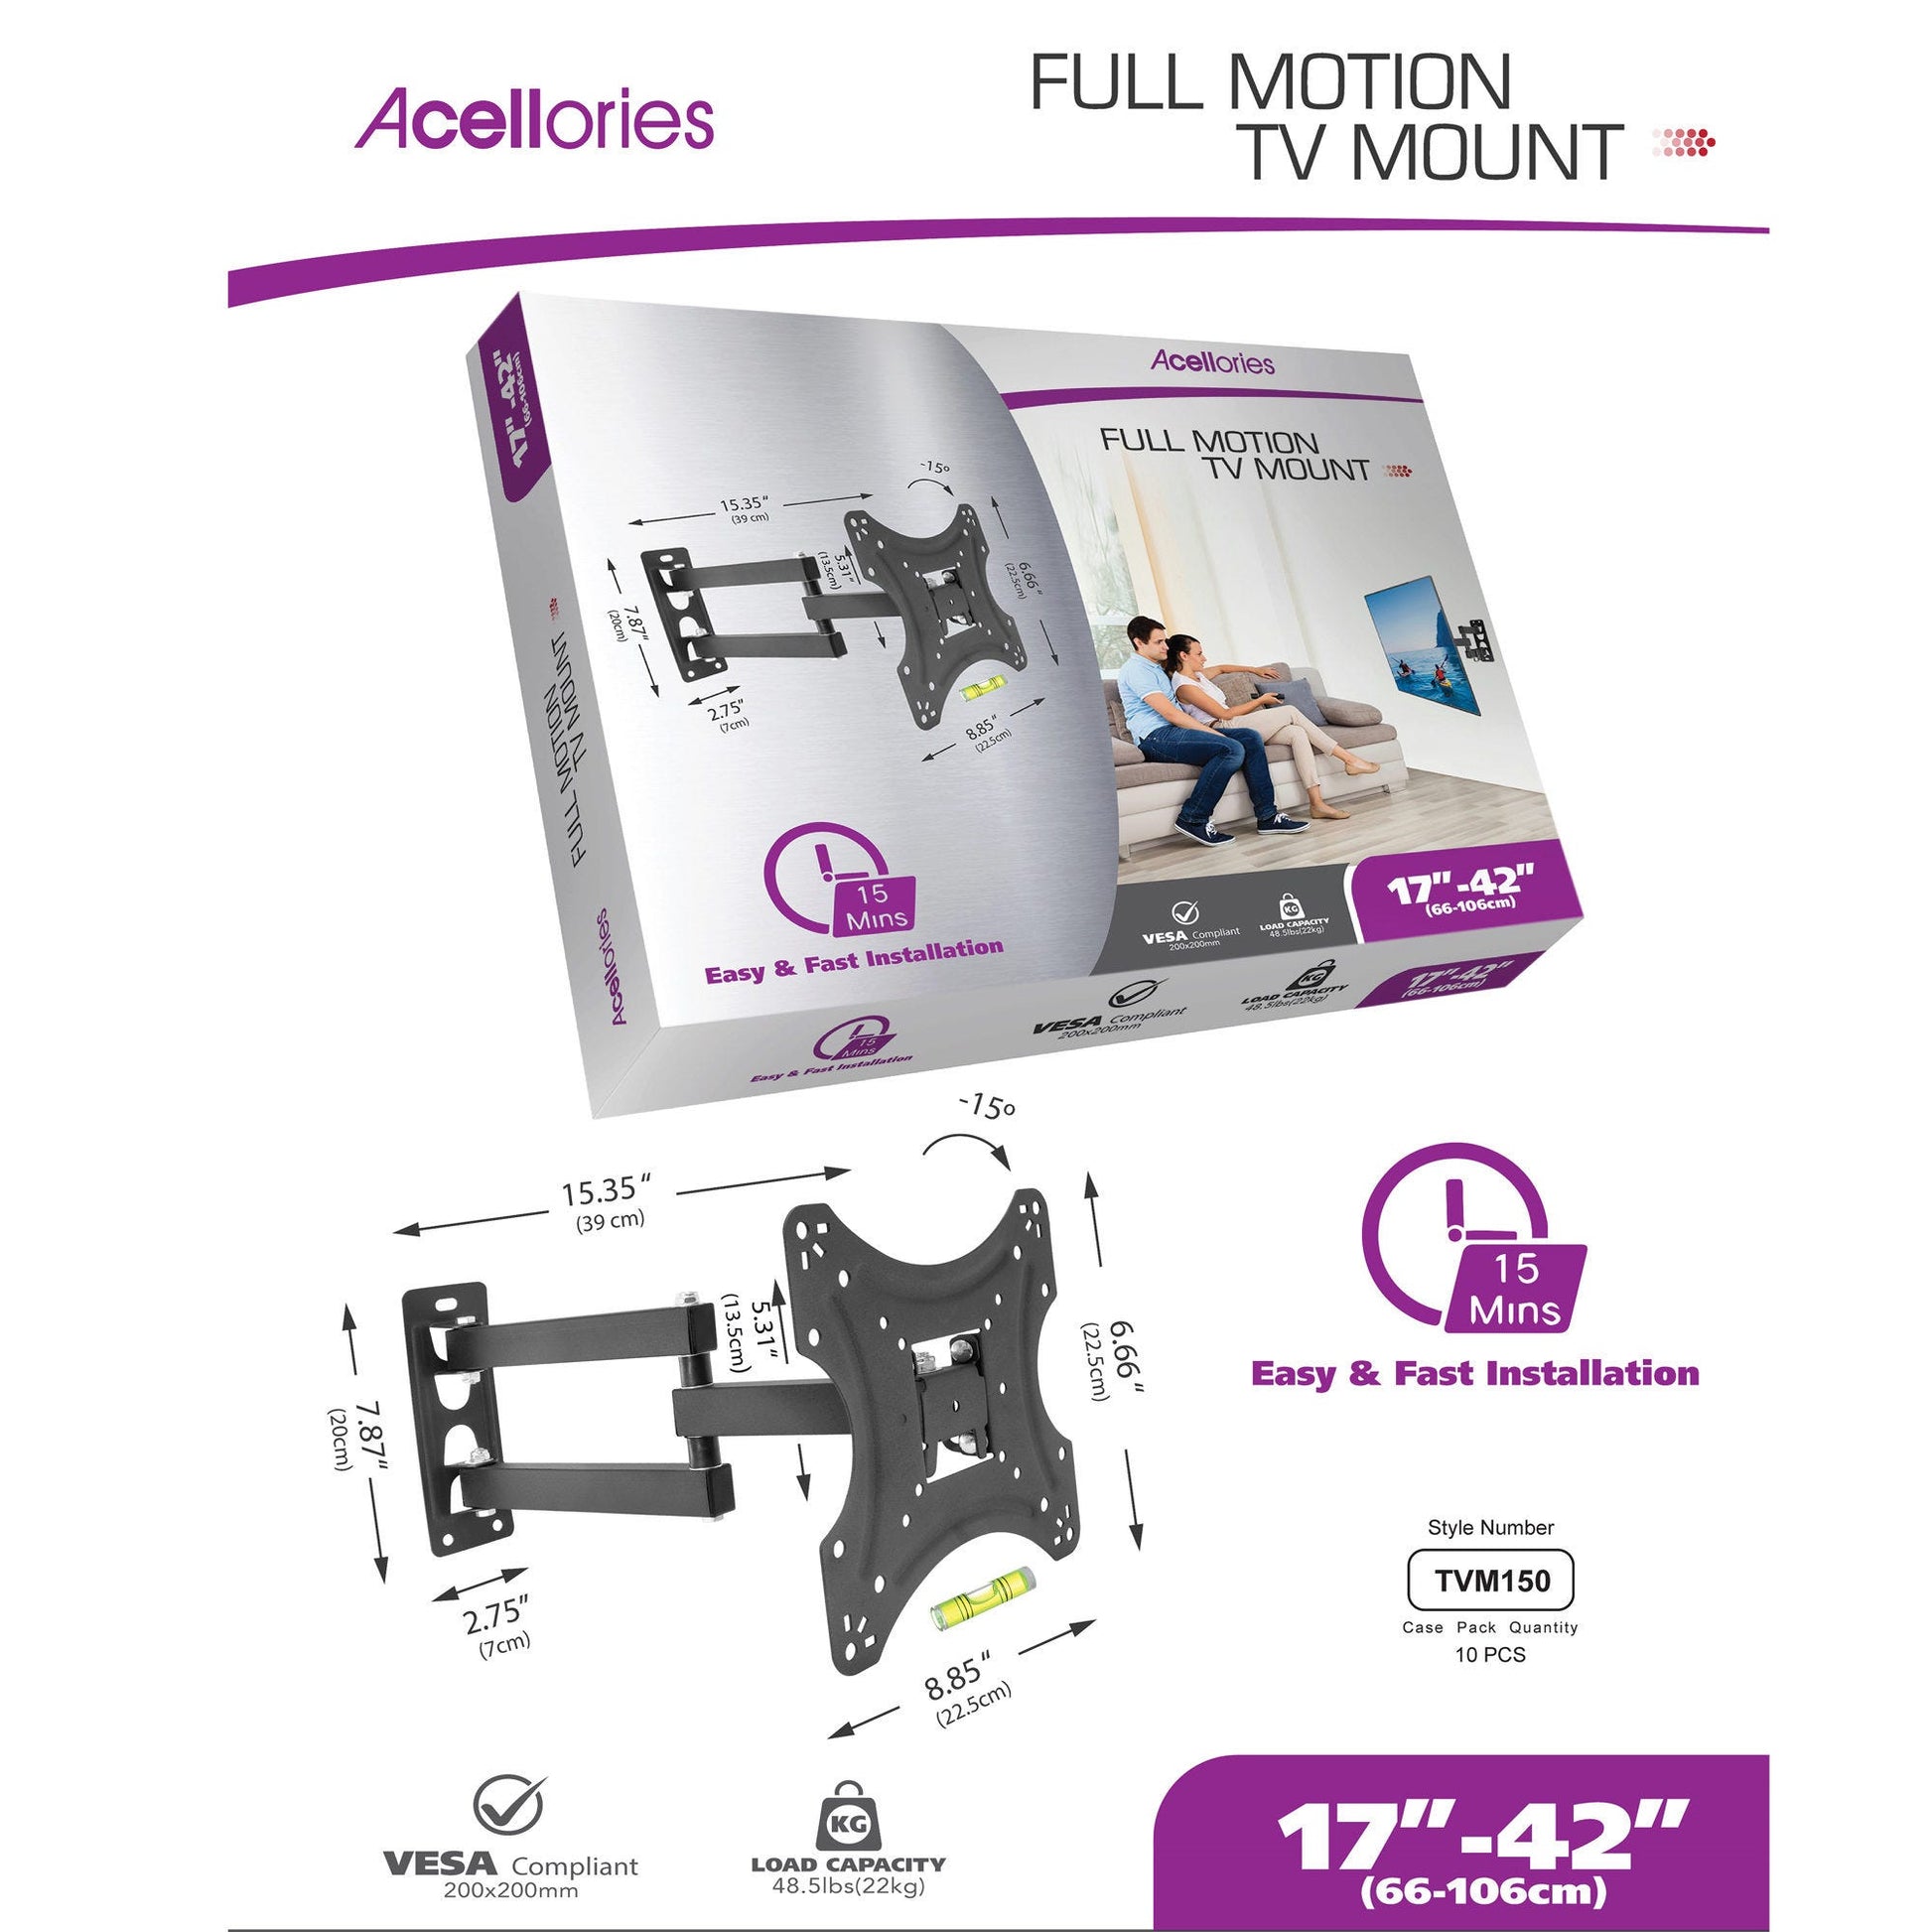 acellories full motion tv mount 17-42 - easy installation -- 3 per box